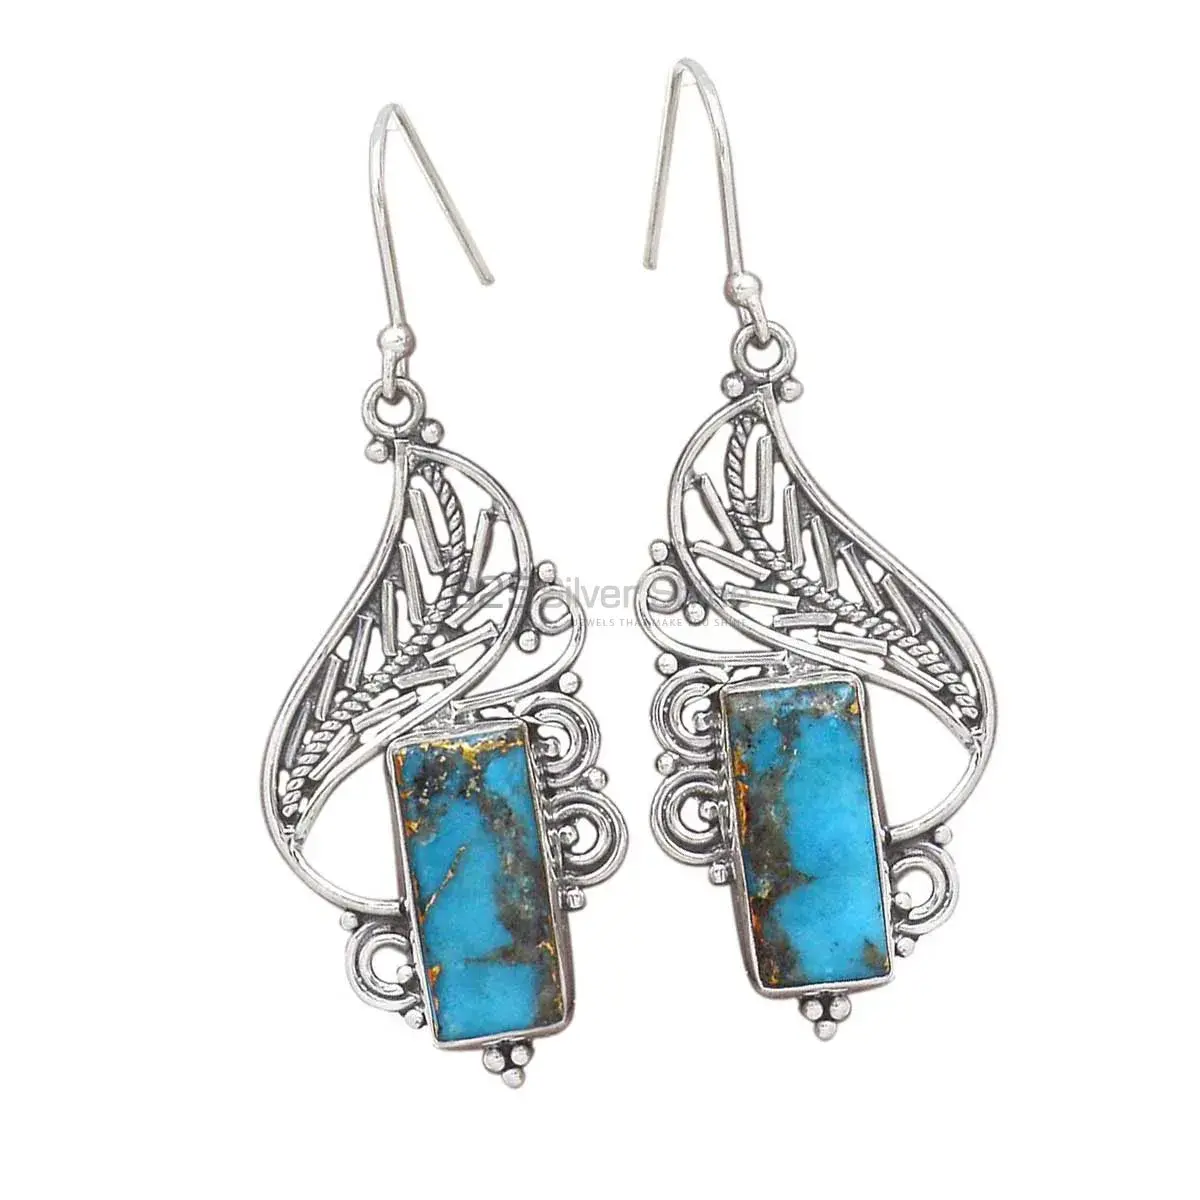 Inexpensive 925 Sterling Silver Earrings Wholesaler In Turquoise Gemstone Jewelry 925SE2951